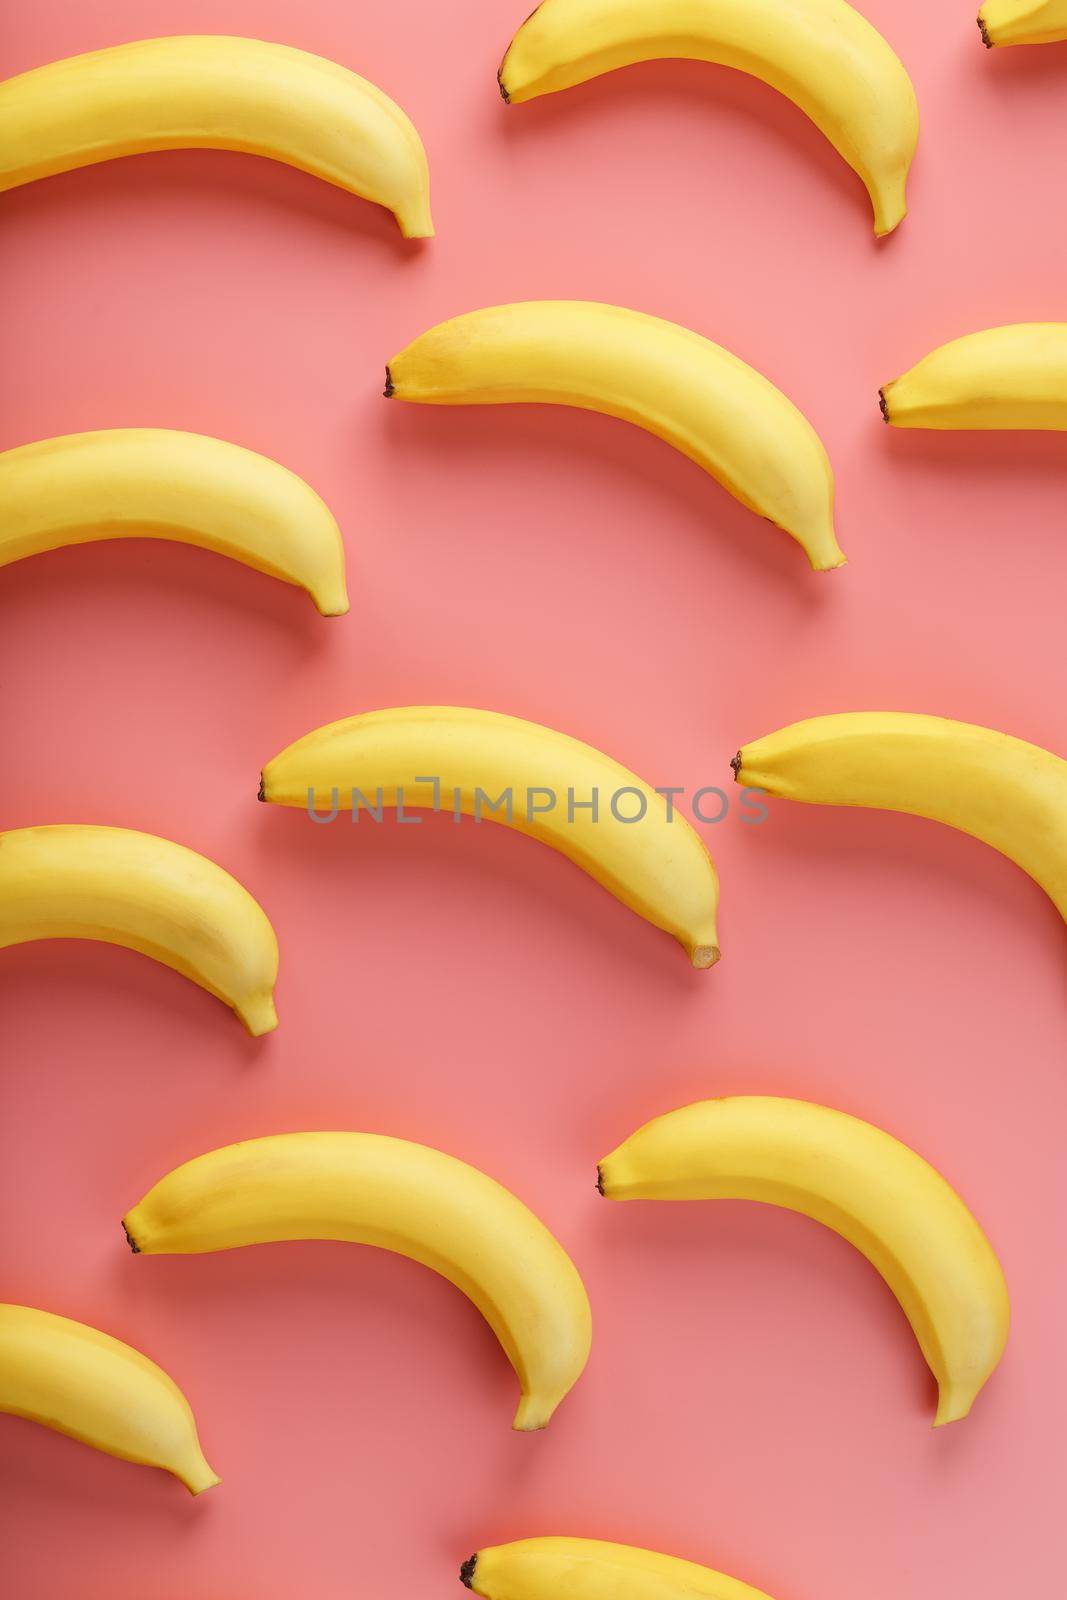 Bright pattern of yellow bananas on a pink background. View from above. Flat lay. Fruit patterns